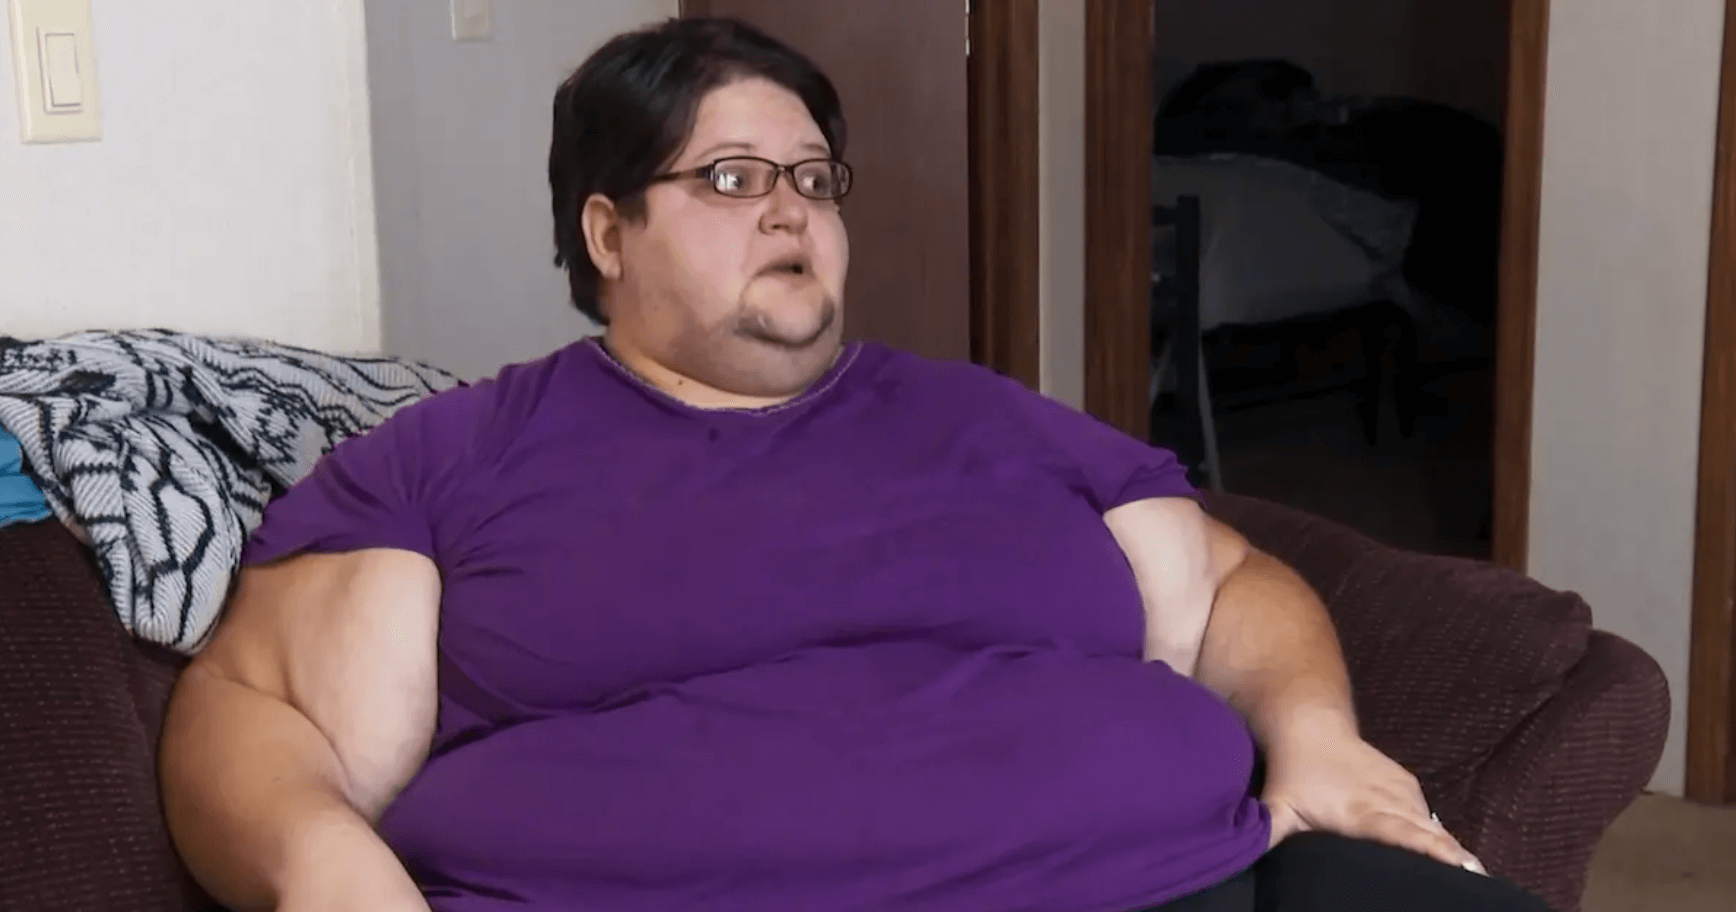 Krystal Hall From ‘My 600-lb Life’ Bariatric Surgery Update!